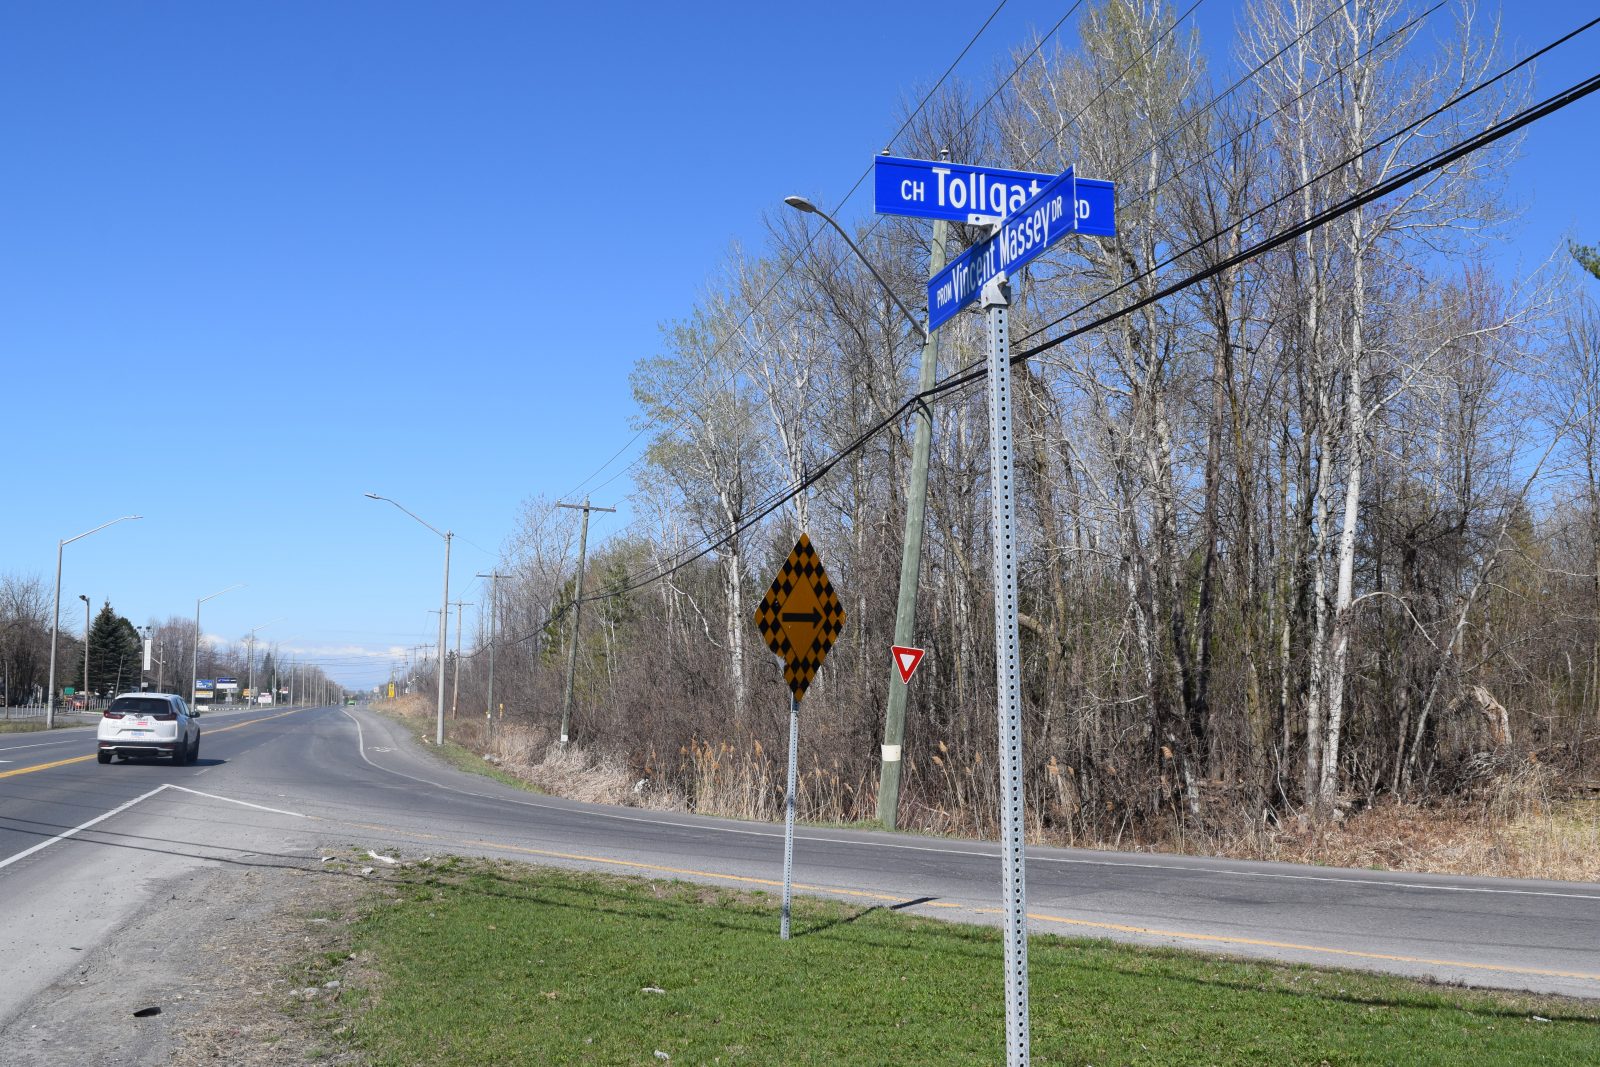 Council votes to leave Vincent Massey/ Tollgate intersection alone for now